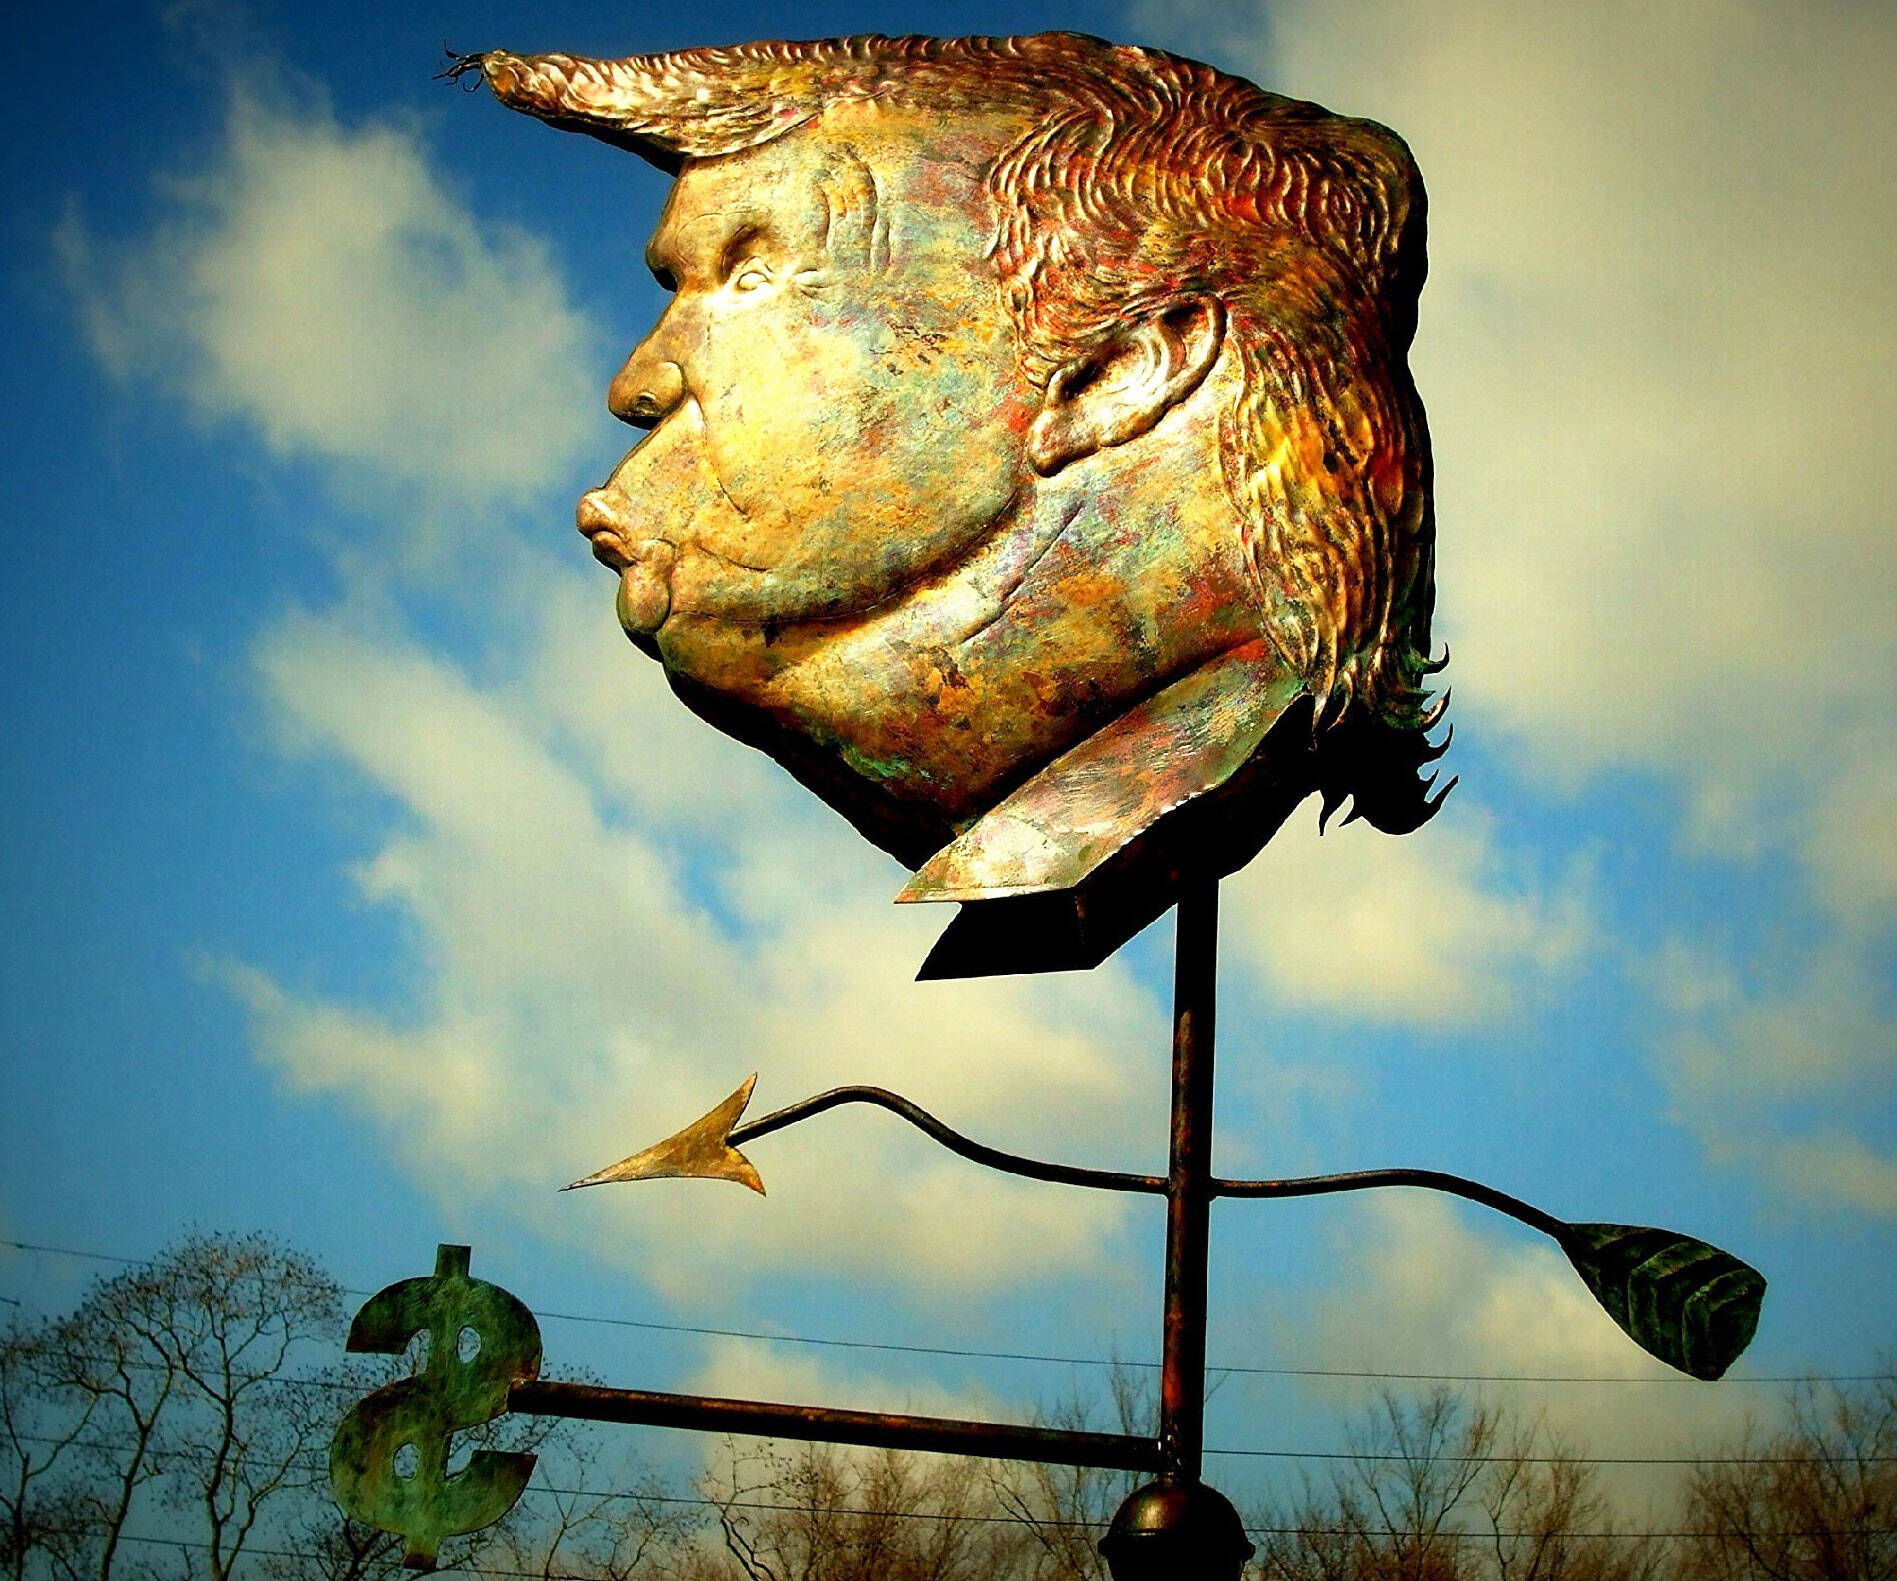 Donald Trump Weathervane - //coolthings.us